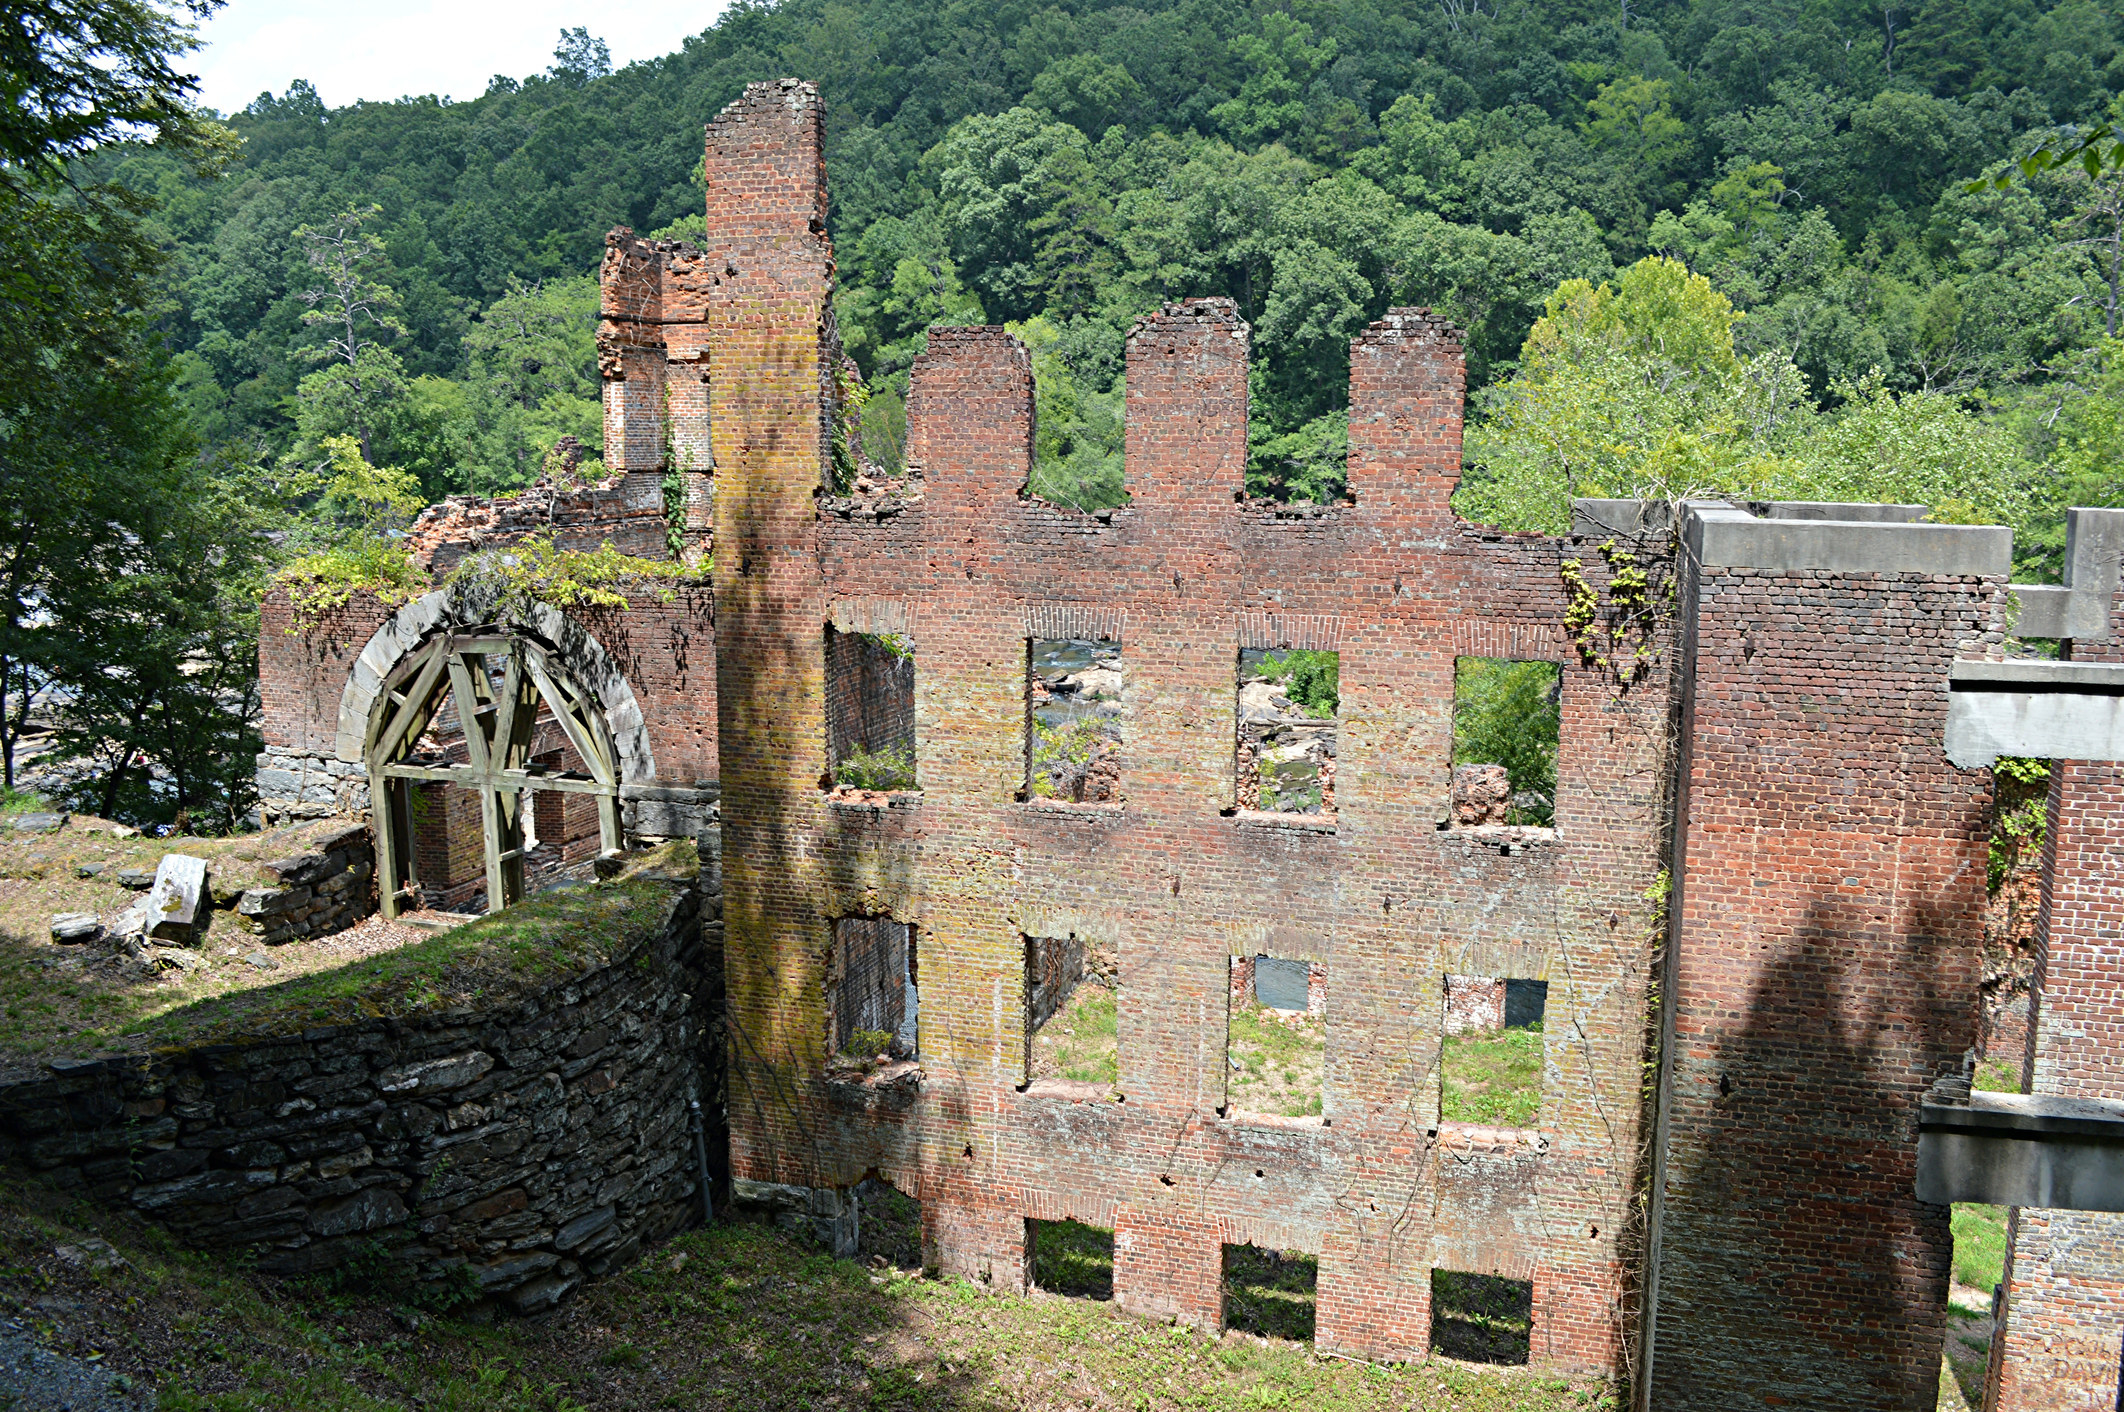 The current image of the Mill Ruins show an empty, abandoned, and damaged building